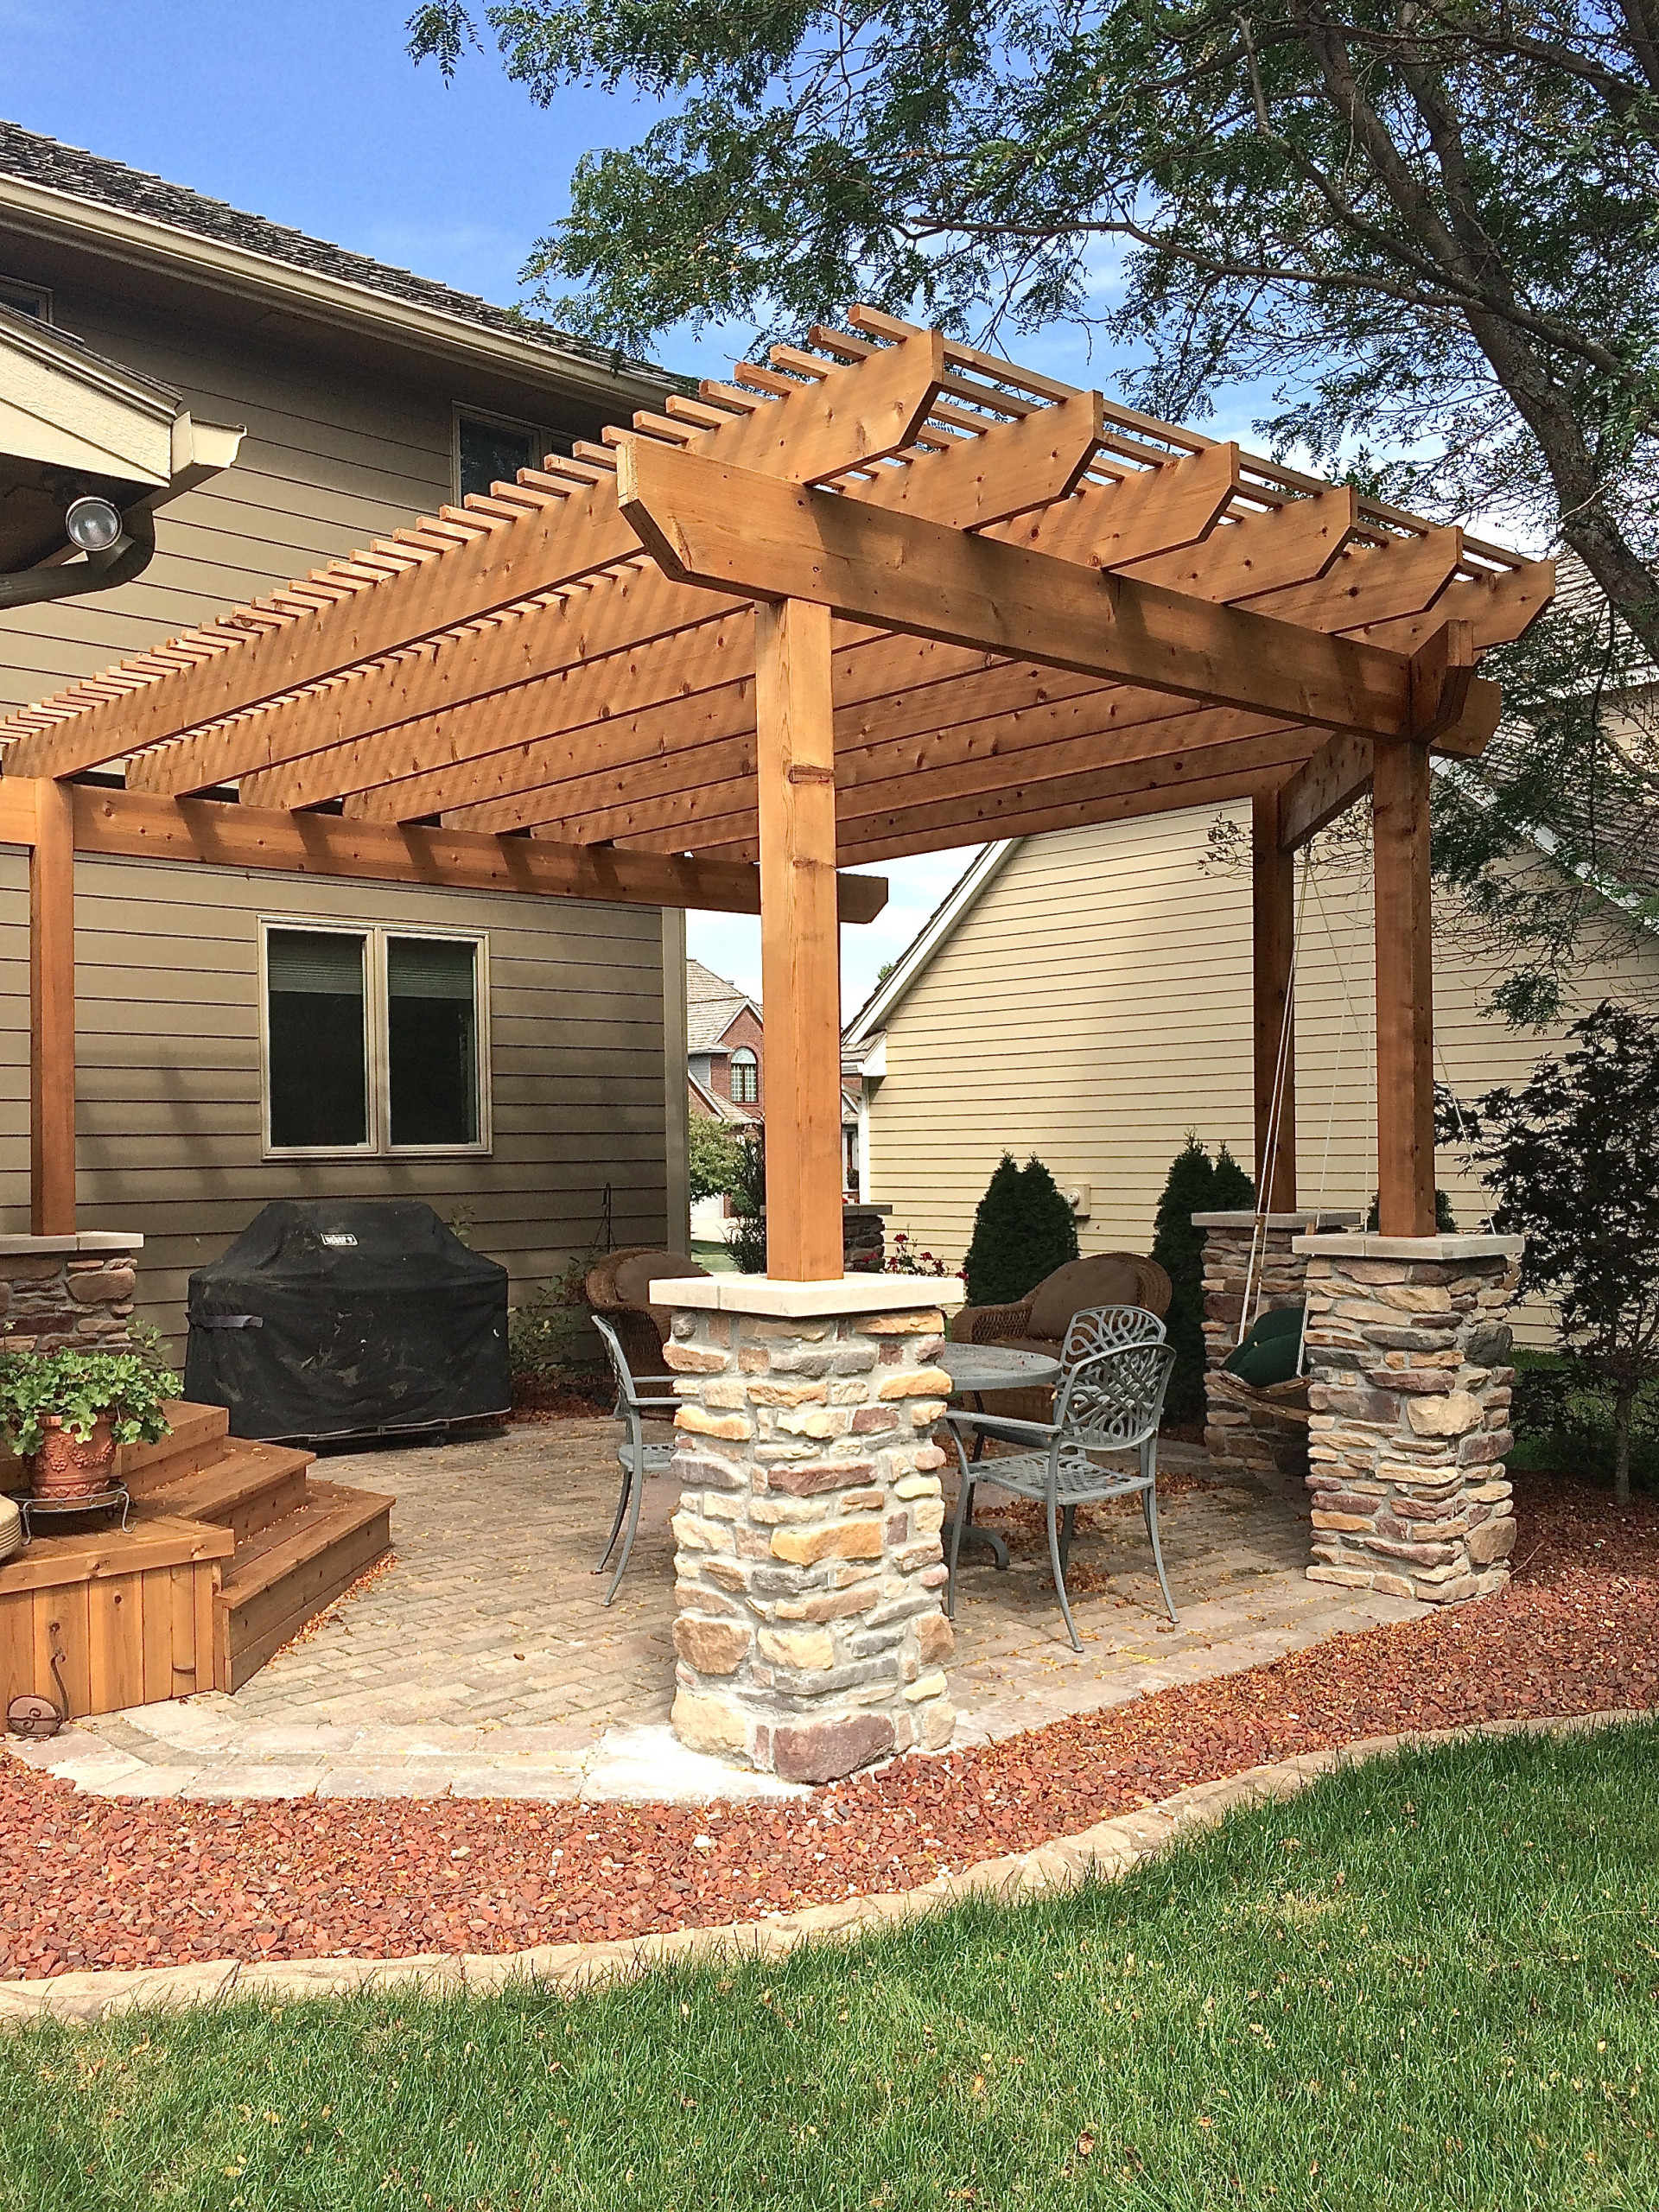 Paver Patio With Cedar Pergola Veneer Stone Columns Swing Traditional Other By Archadeck Of Central Iowa Houzz - How To Build A Pergola On Paver Patio